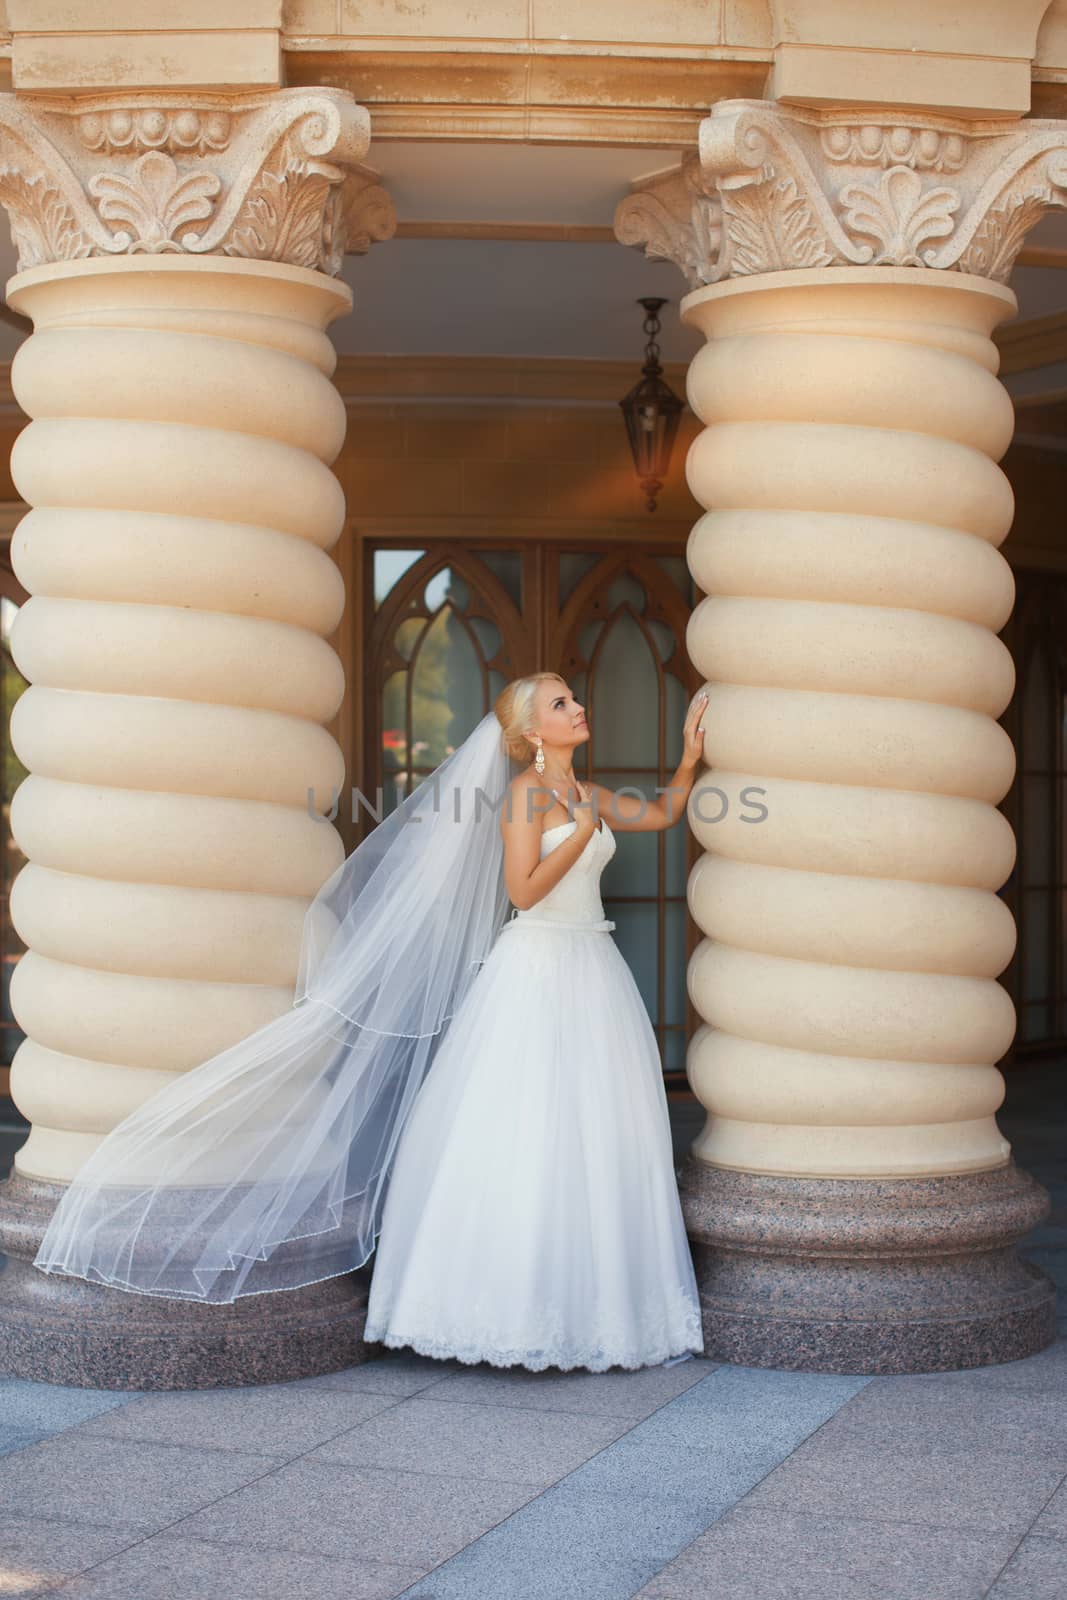 Bride with long veil standing near the column